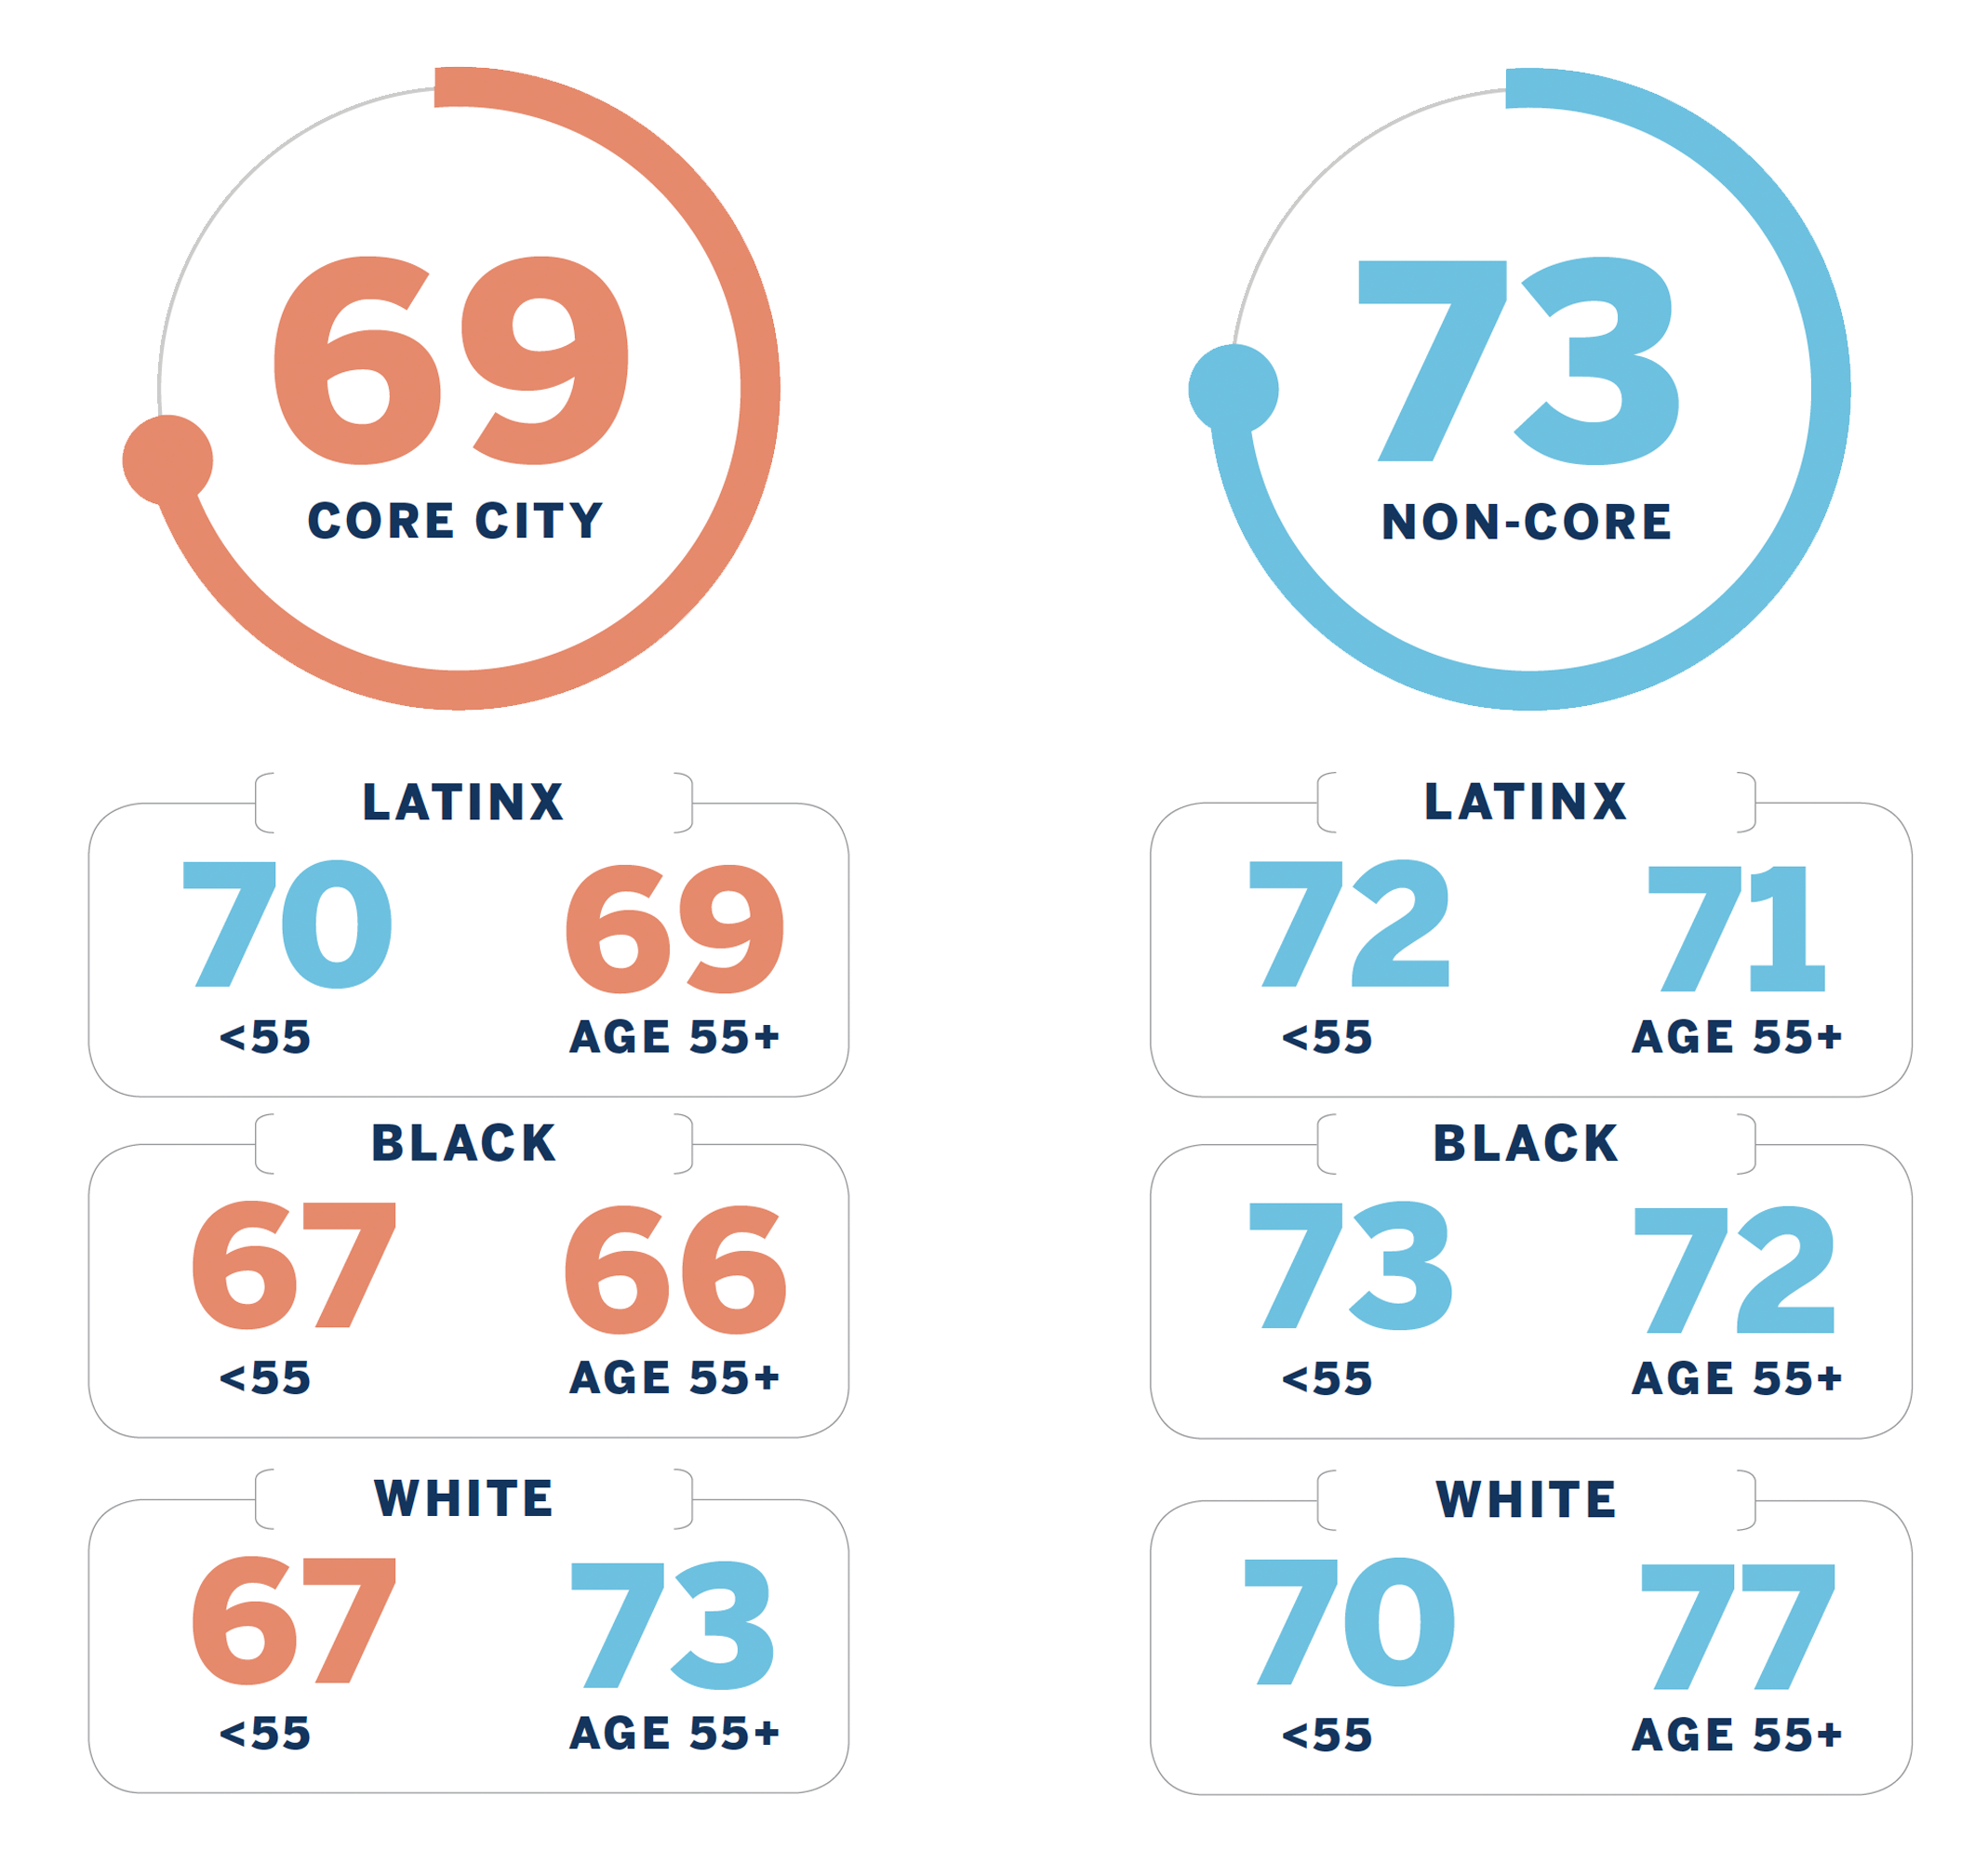 Chart breakdown: Core City: 69 (broken down by Latinx, Black, and White ages less than and over 55) Non-Core: 73 (broken down by Latinx, Black, and White ages less than and over 55)